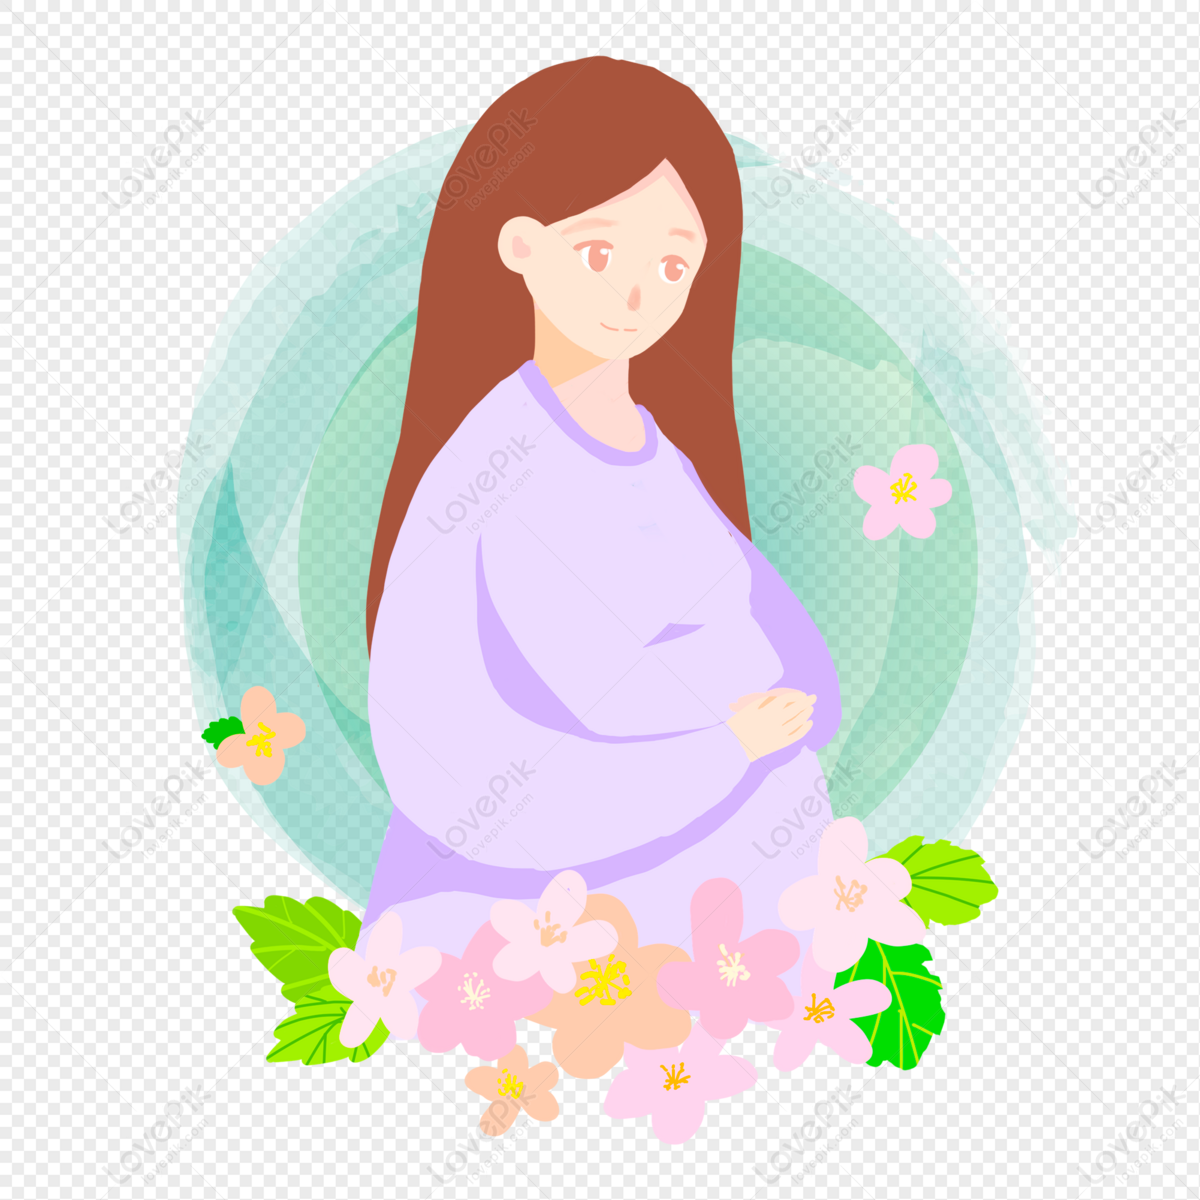 Cartoon Pregnant Mom PNG Transparent Image And Clipart Image For Free  Download - Lovepik | 401565517